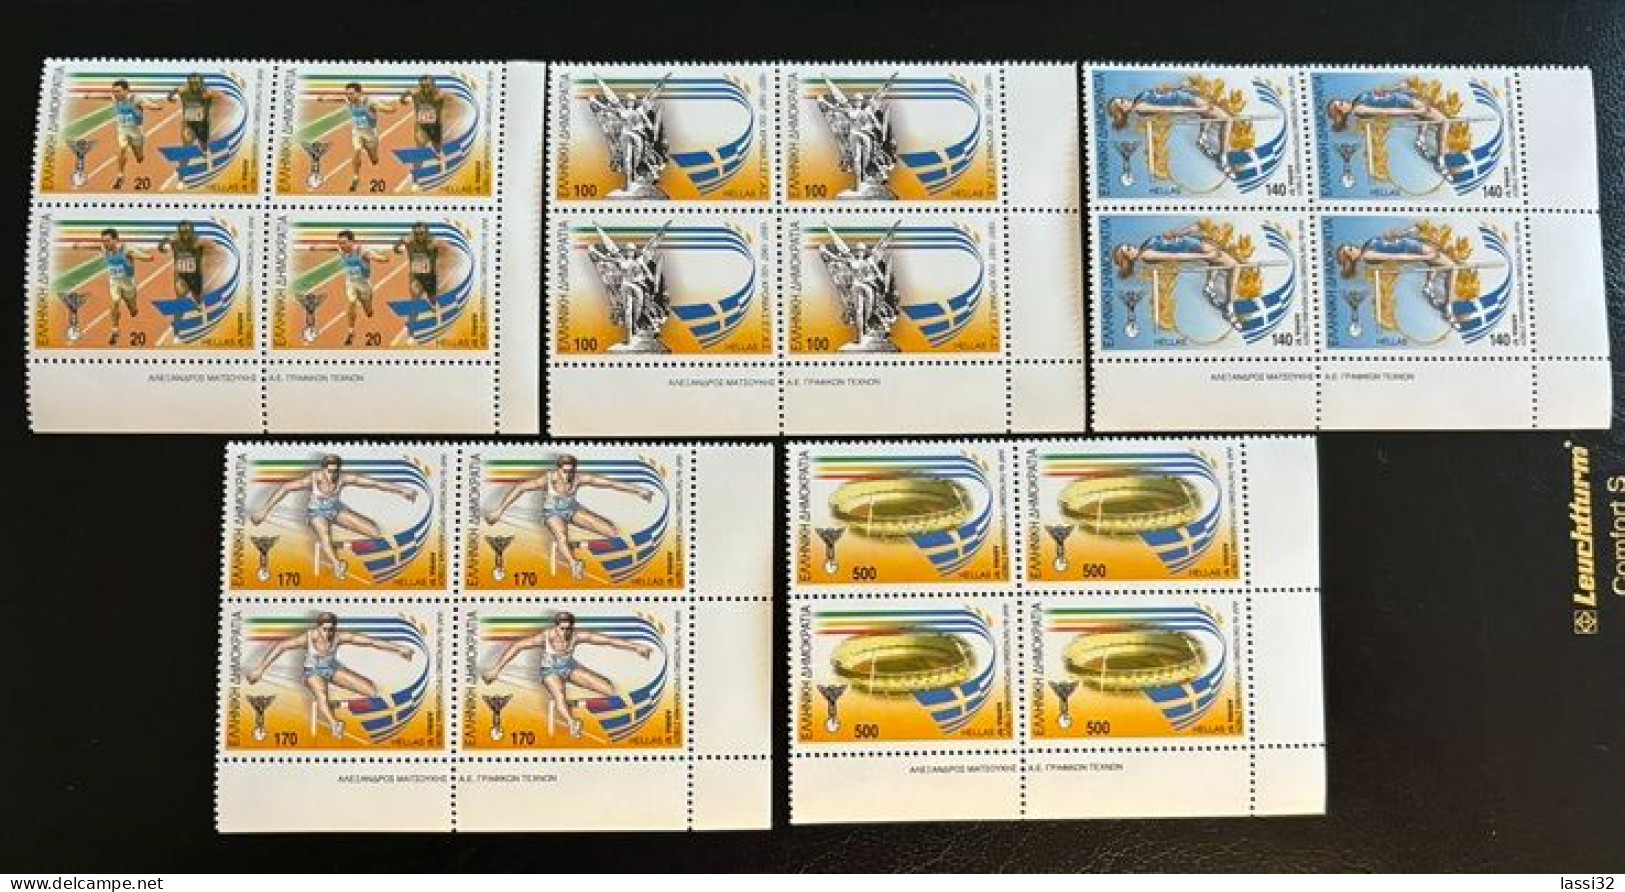 GREECE,1997, OLYMPIC GAMES ATHLETISM ATLETISMO STADIUM, MNH - Unused Stamps